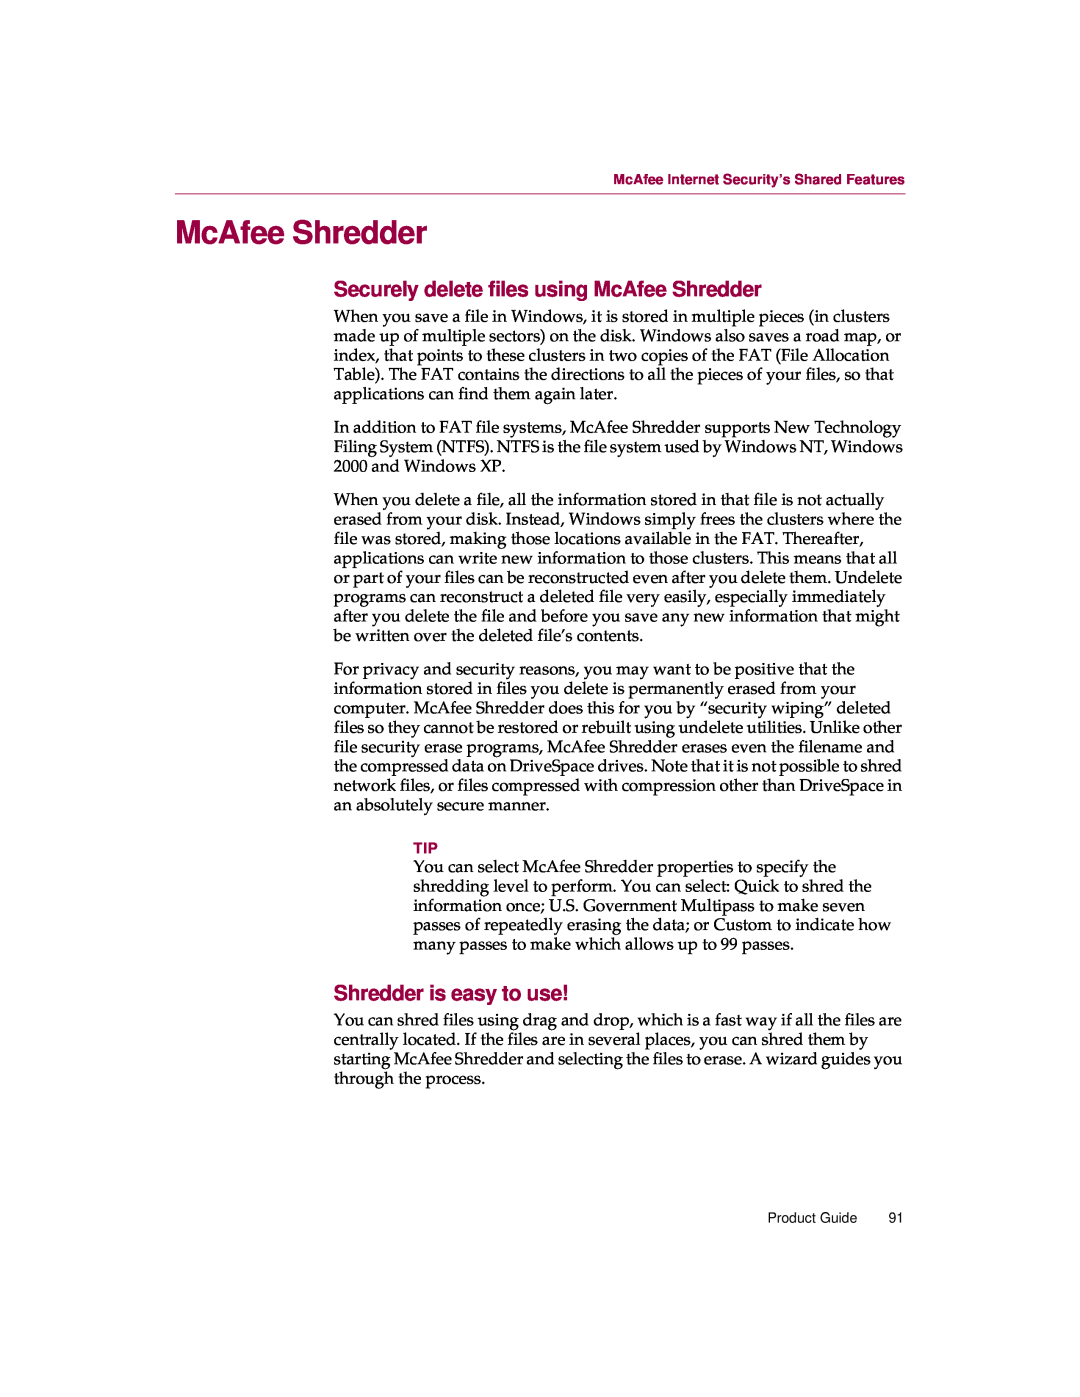 McAfee 5 manual Securely delete files using McAfee Shredder, Shredder is easy to use 